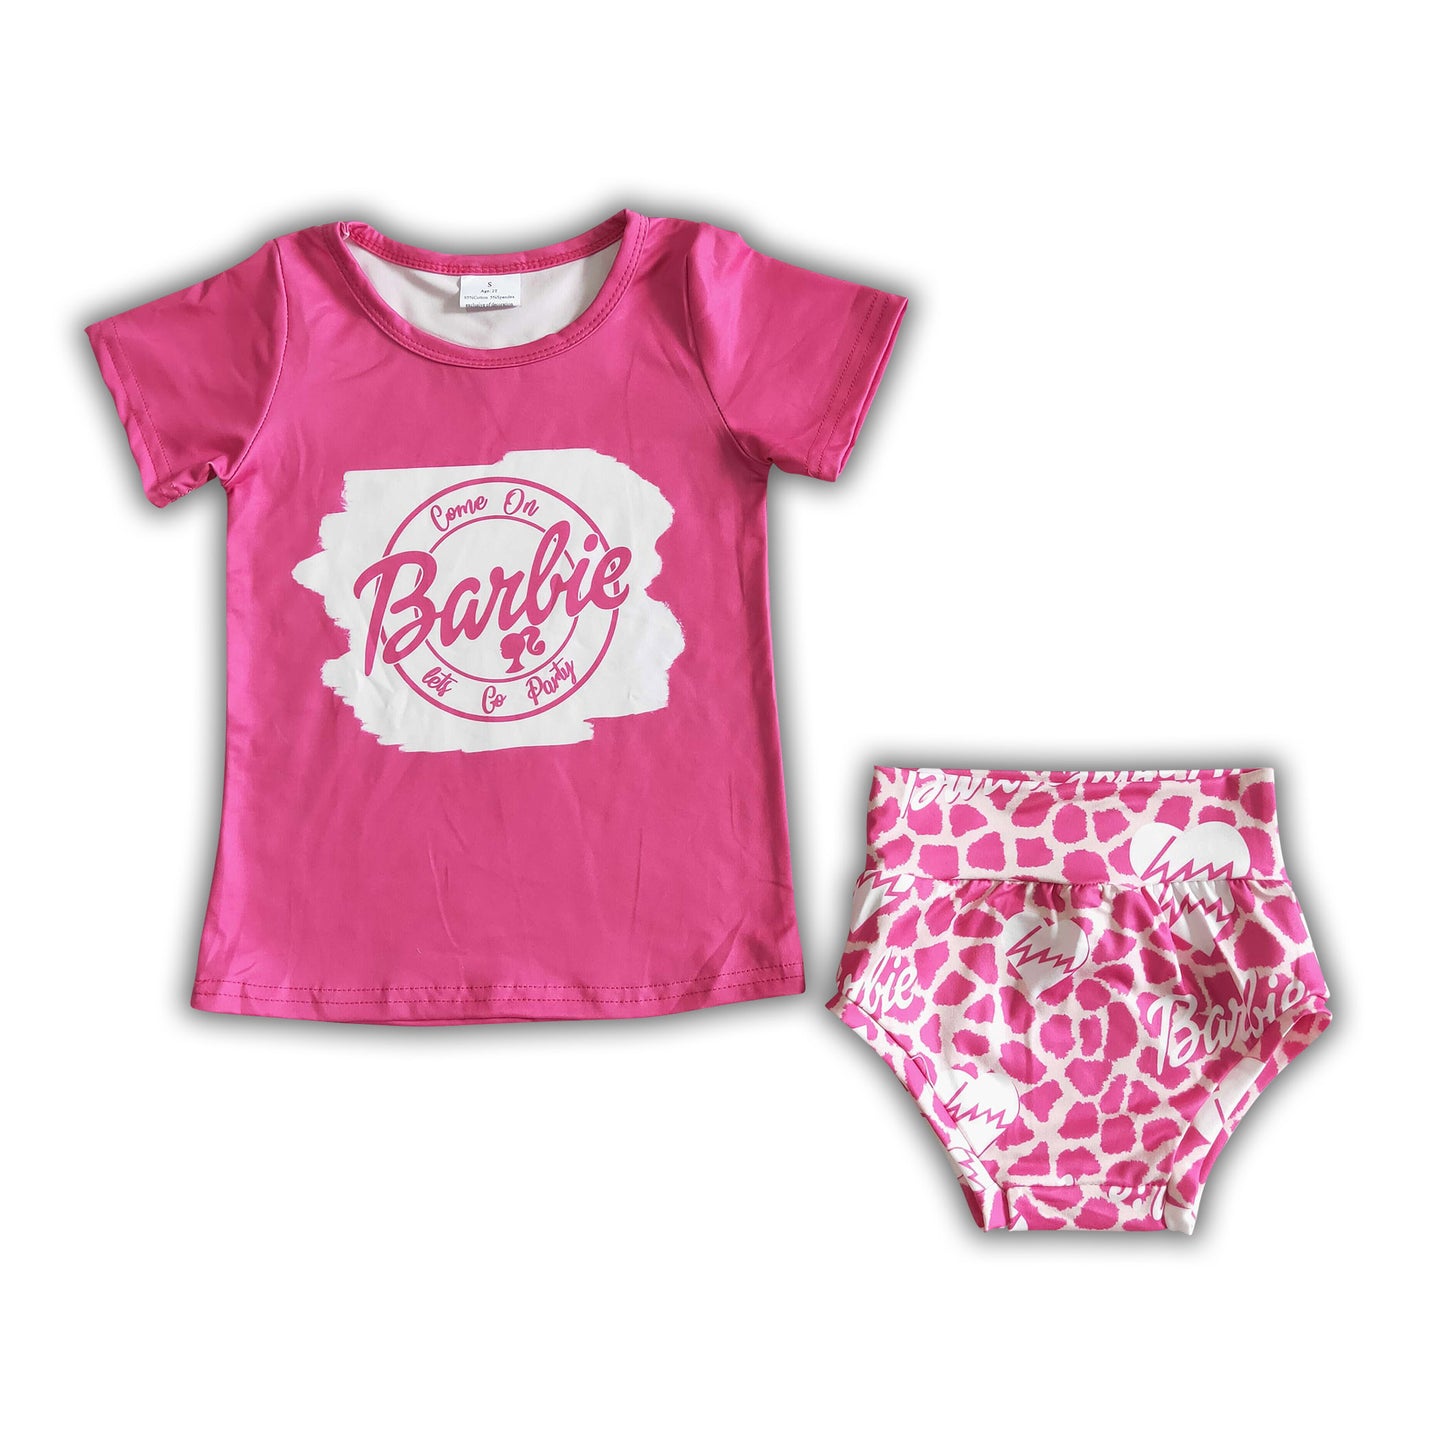 Come on let go party baby girls bummies set